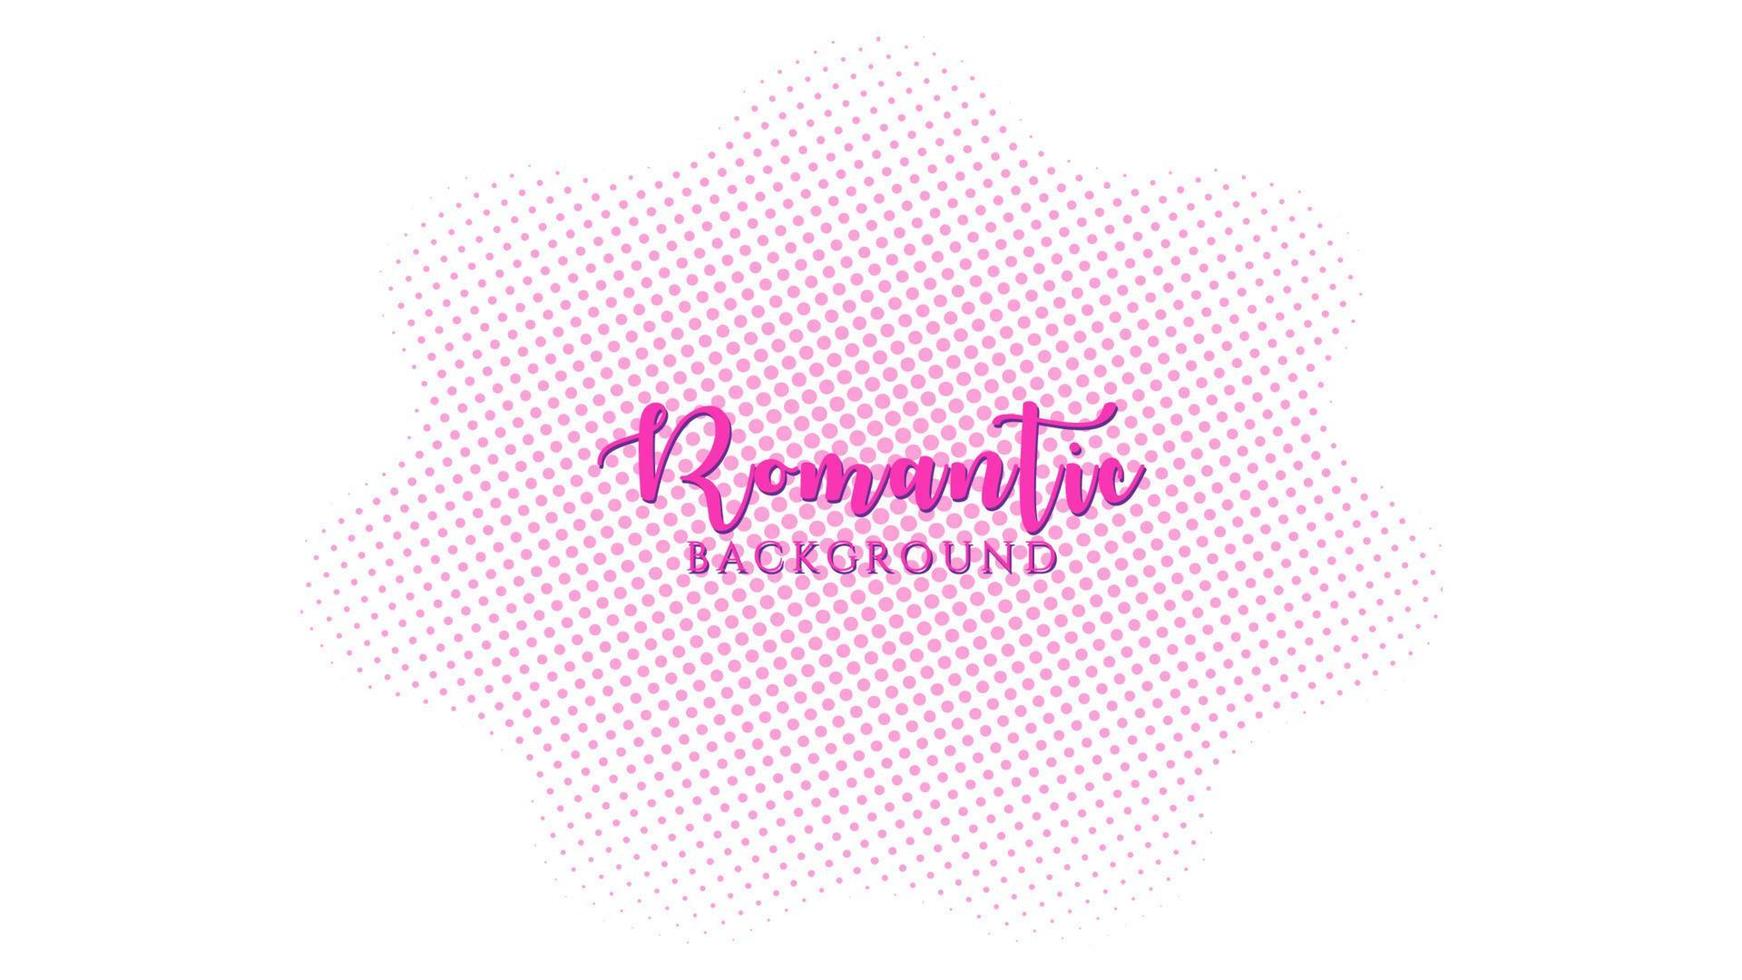 Halftone Background Design Template, Pop Art, Abstract Dots Pattern Illustration, Retro Texture Element, Rounded Shape, Pink Violet Gradation, Romantic Color, Valentine Day, Polka-dotted vector